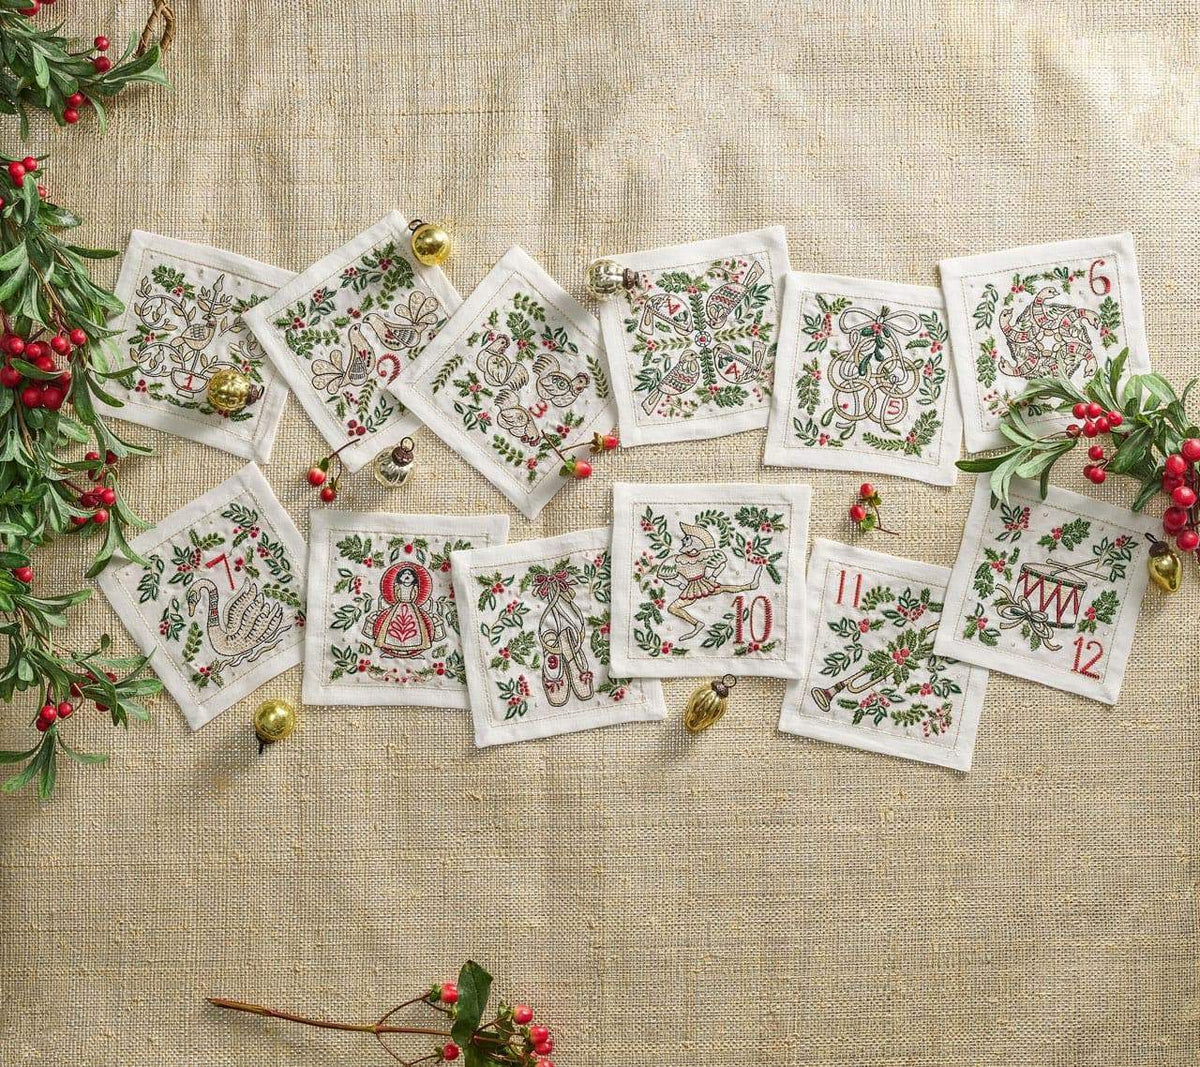 https://www.martinperri.shop/wp-content/uploads/1696/33/12-days-of-christmas-linen-cocktail-napkins-set-of-12-in-a-gift-box-kms_0.jpg